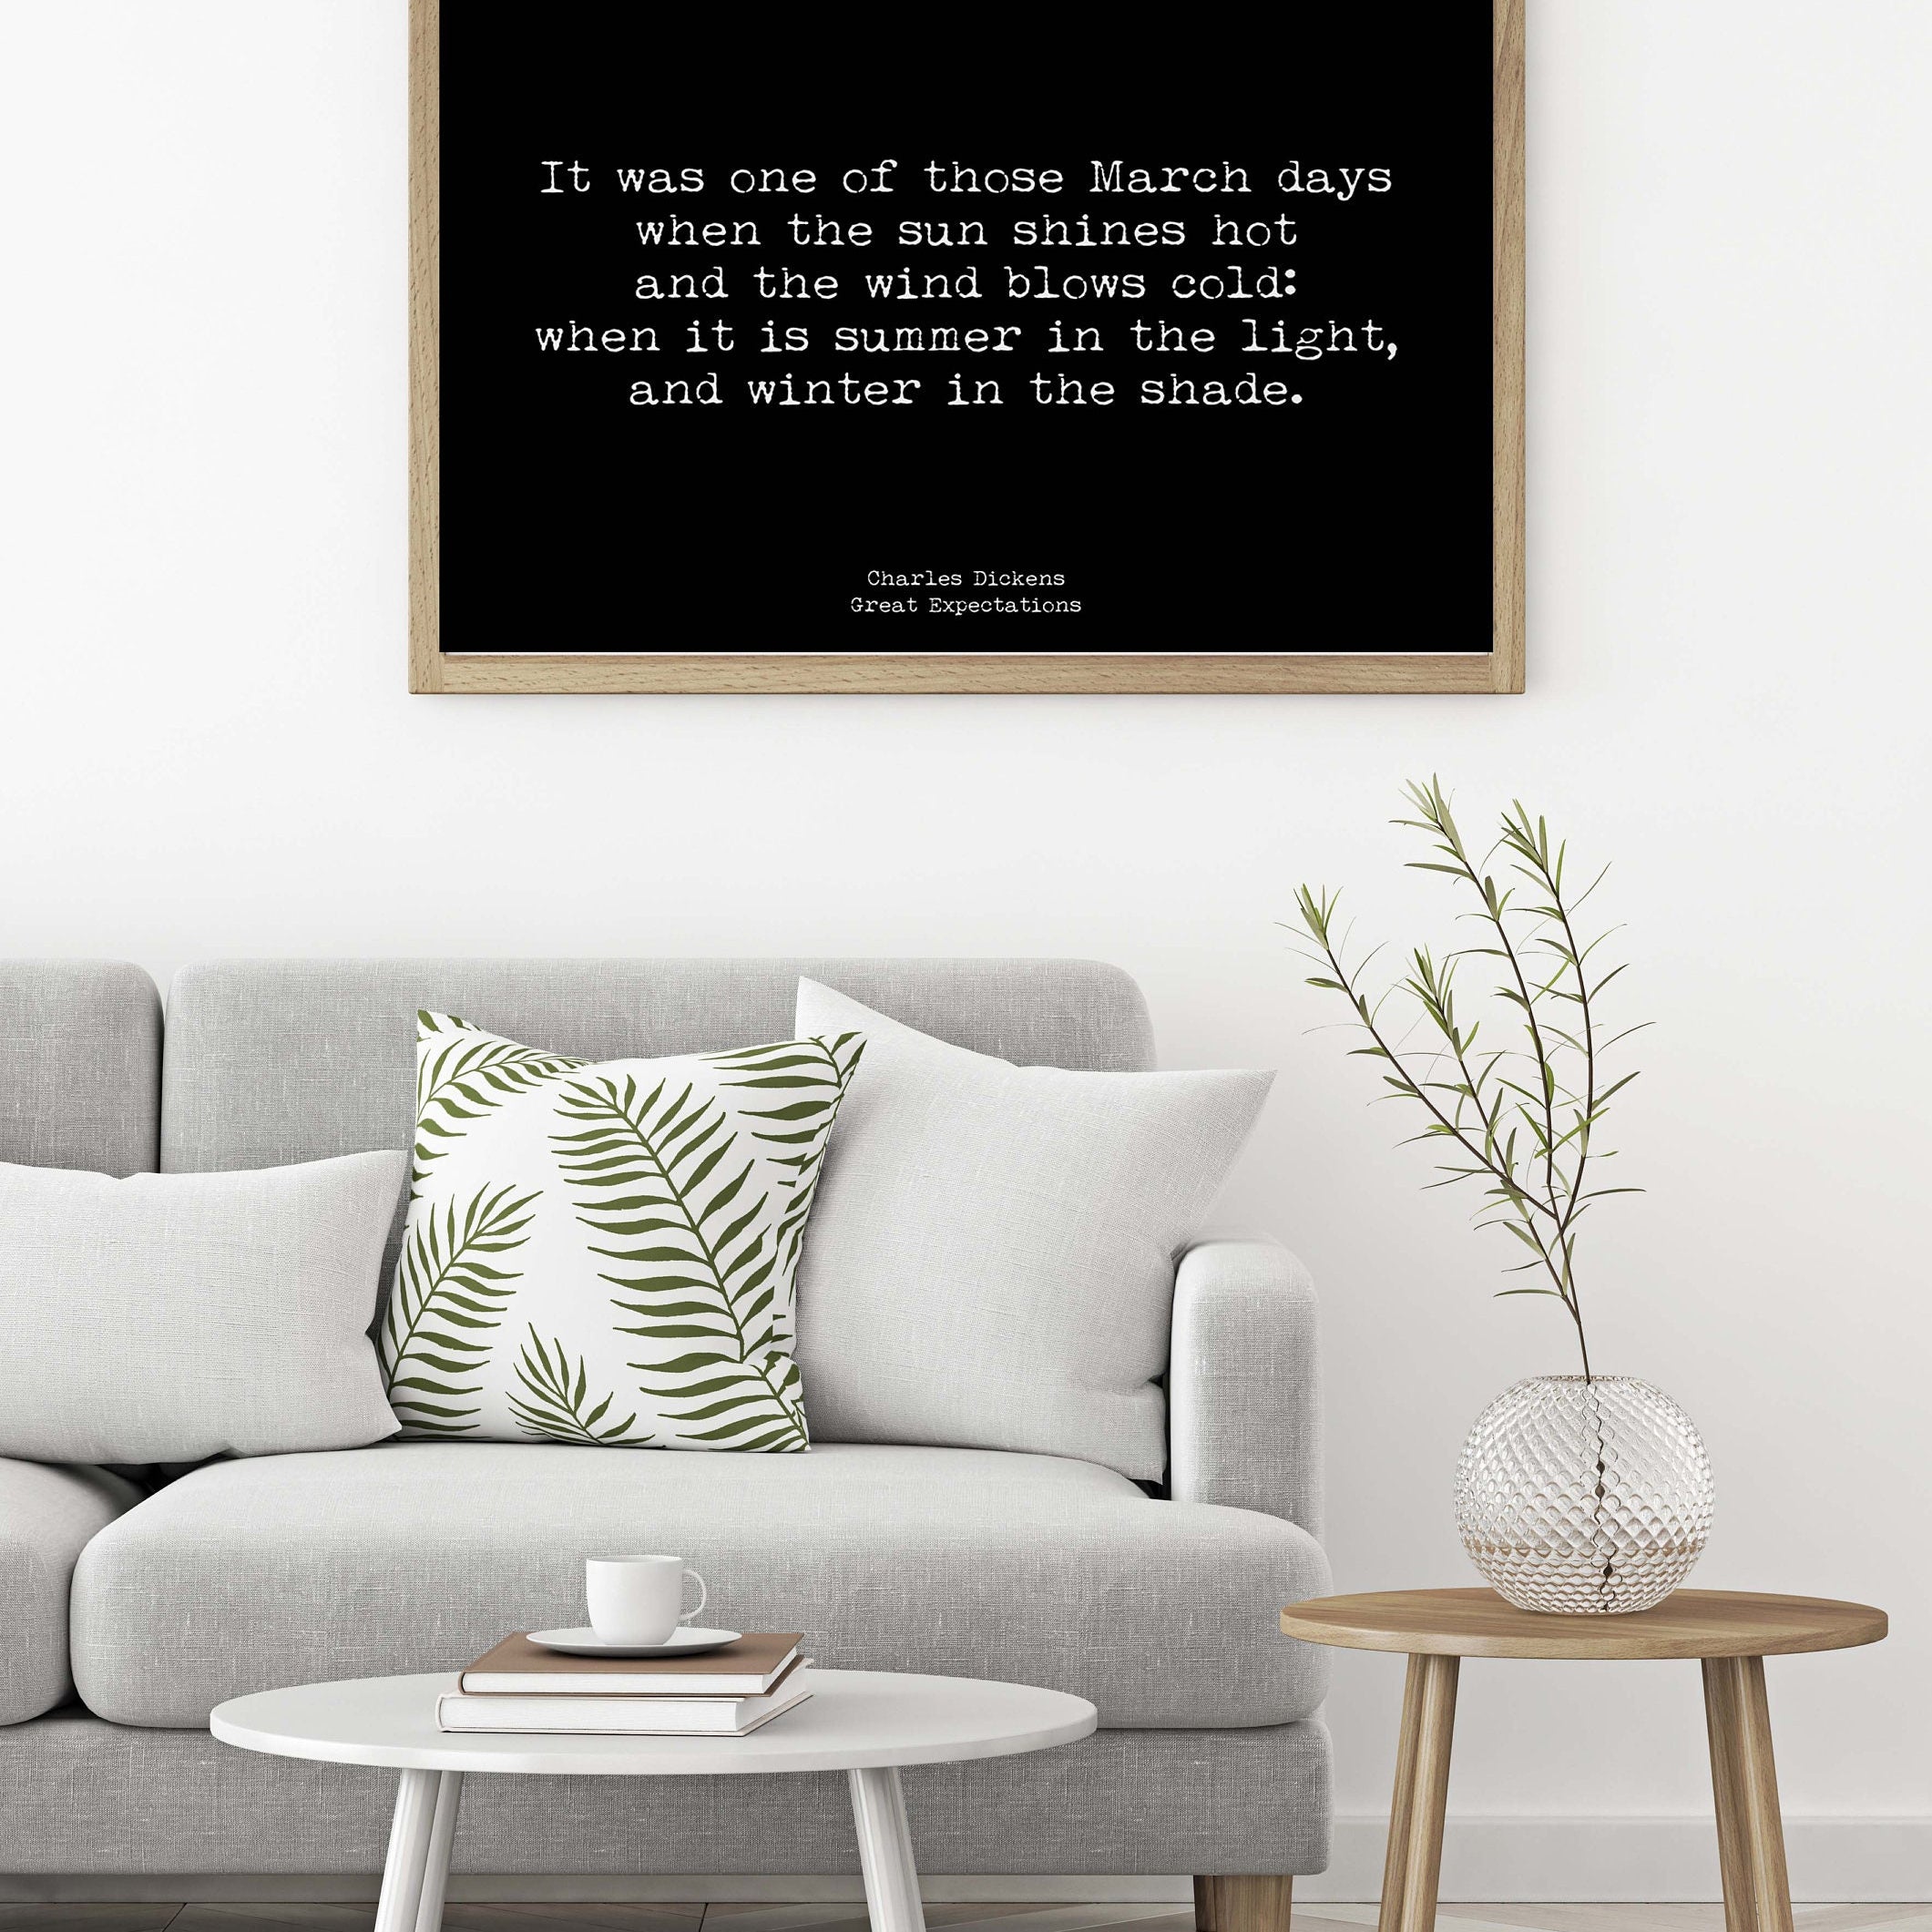 Charles Dickens Quote Print Wall Art from Great Expectations, Black & White unframed Art Print